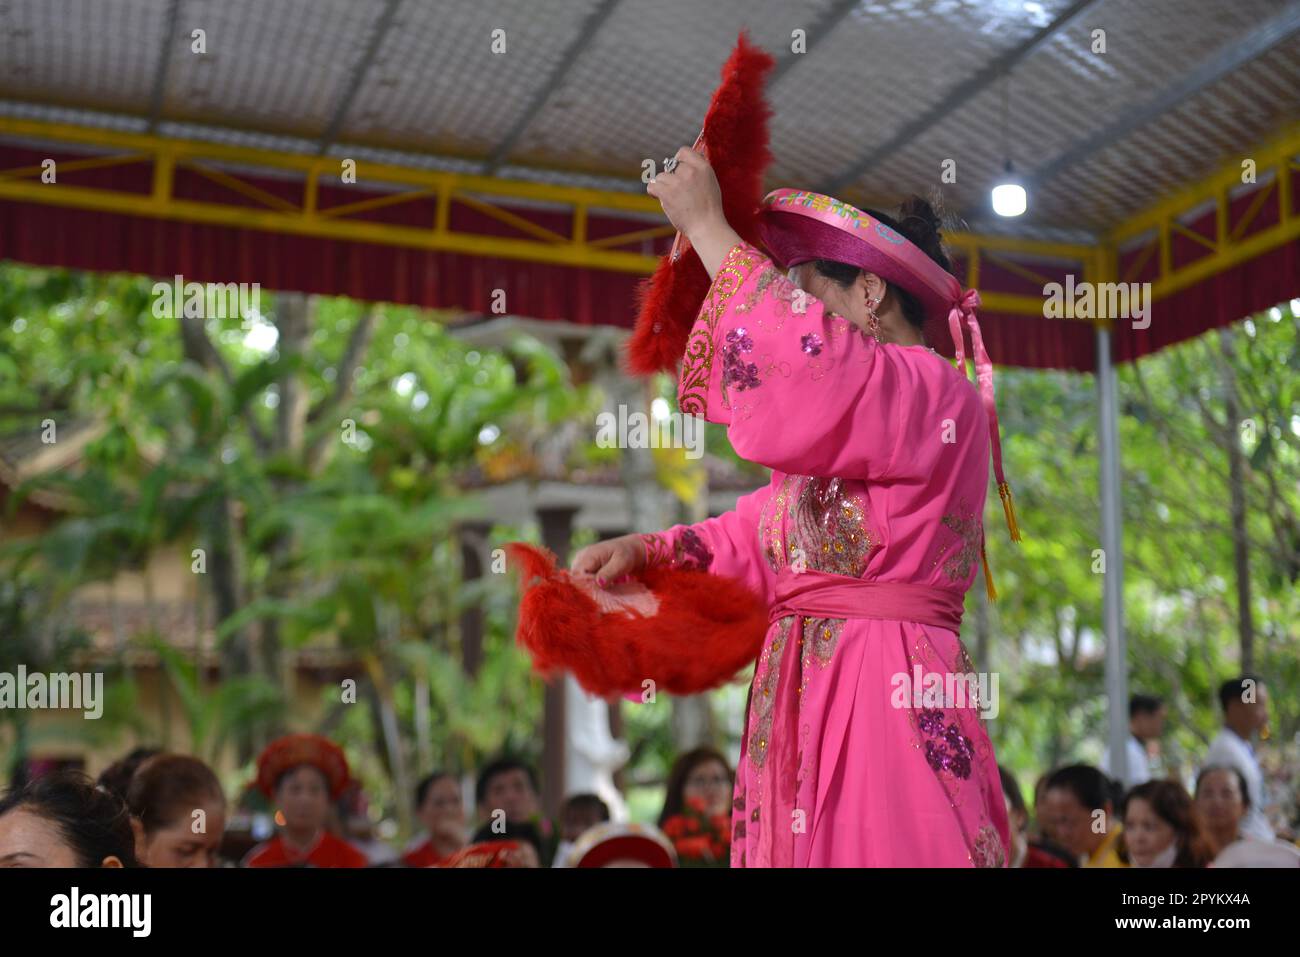 Shaman plays the role of a god performing rituals to transmit messages in Mother Goddess Worship event. Vietnam. Asia. hầu đồng. 越南旅游, 베트남 관광, ベトナム観光 Stock Photo